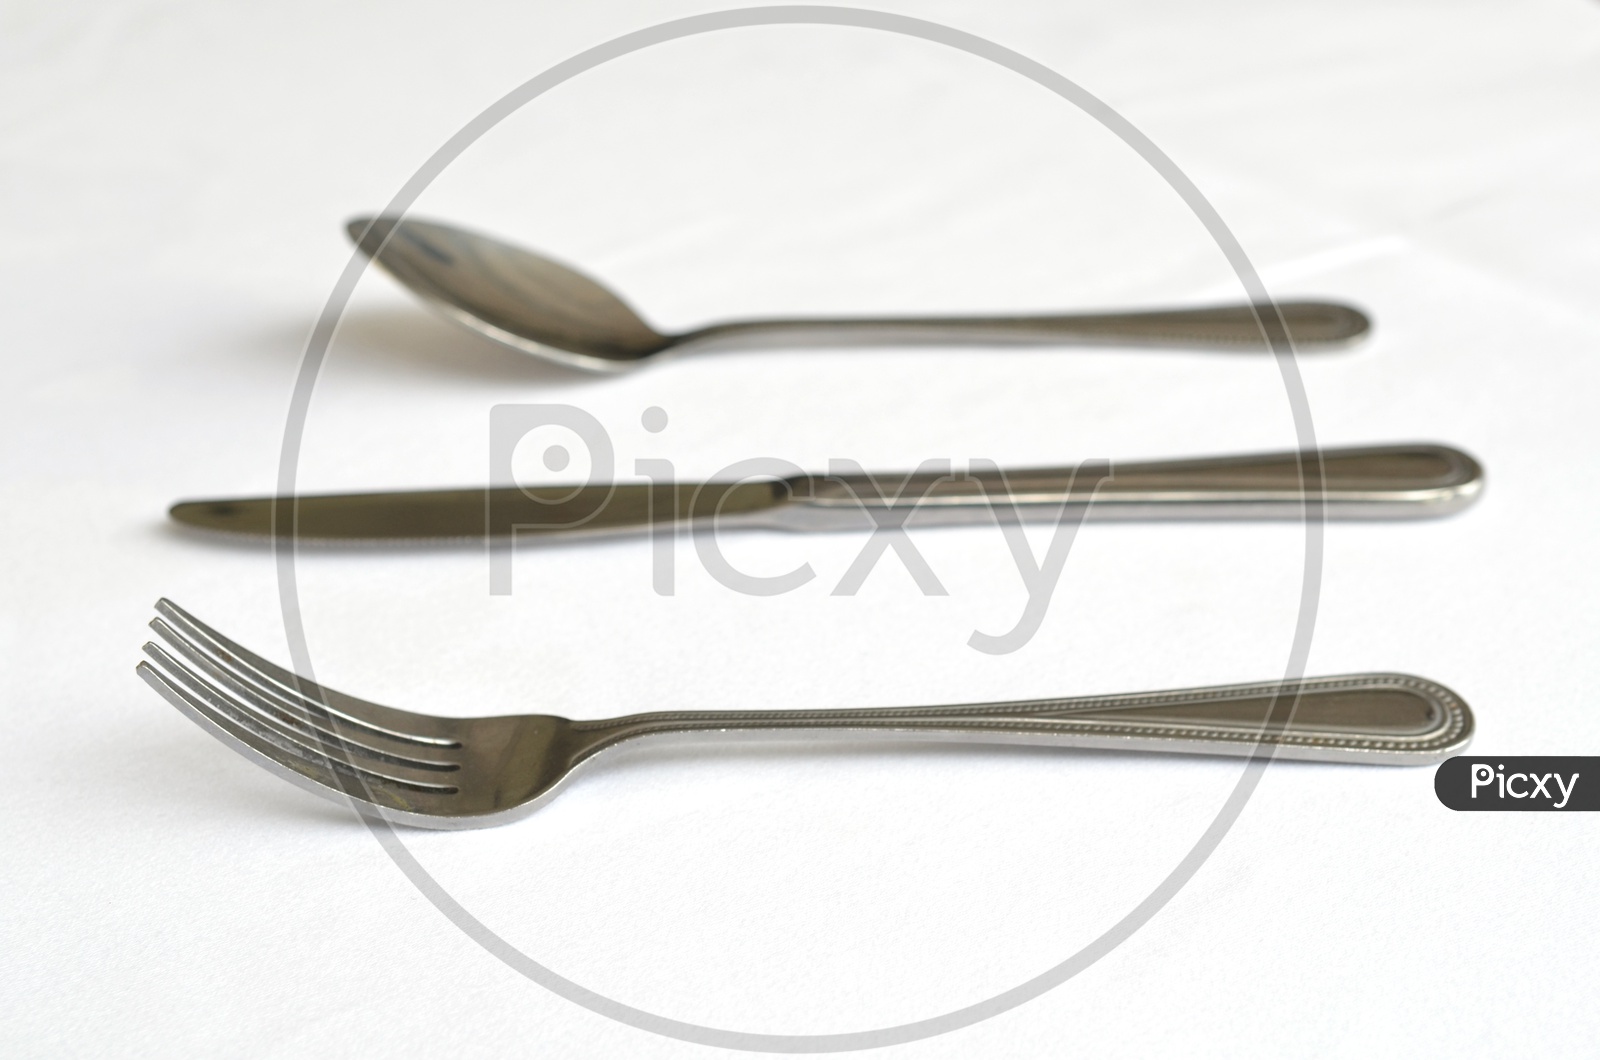 Fork spoon and knife on the table